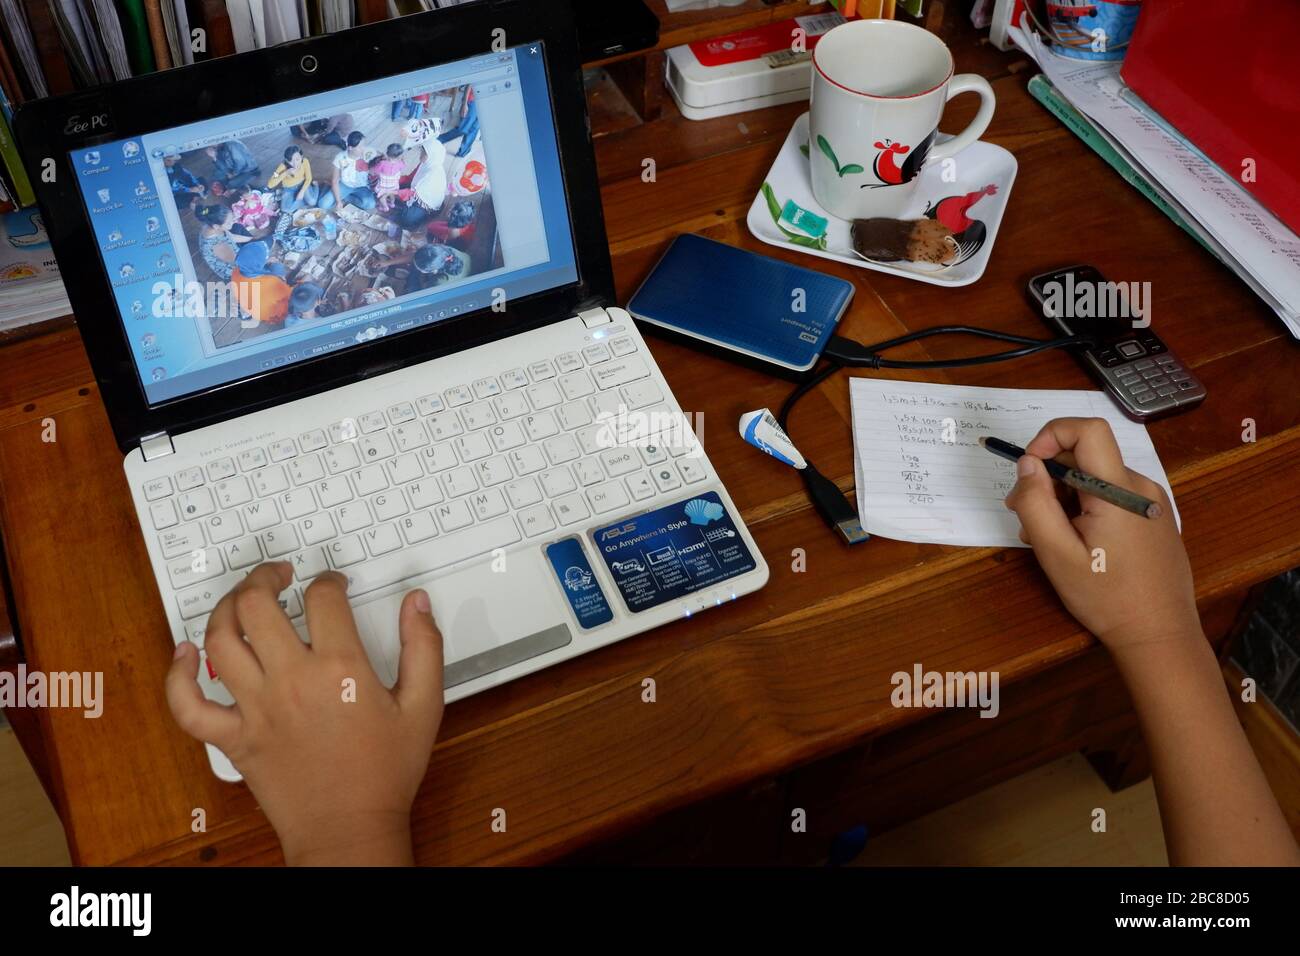 A close up shot of a person's hand, a laptop, an external harddisk, a cup of coffee, a cellphone, a note and a pen. Ready to work at home. Stock Photo